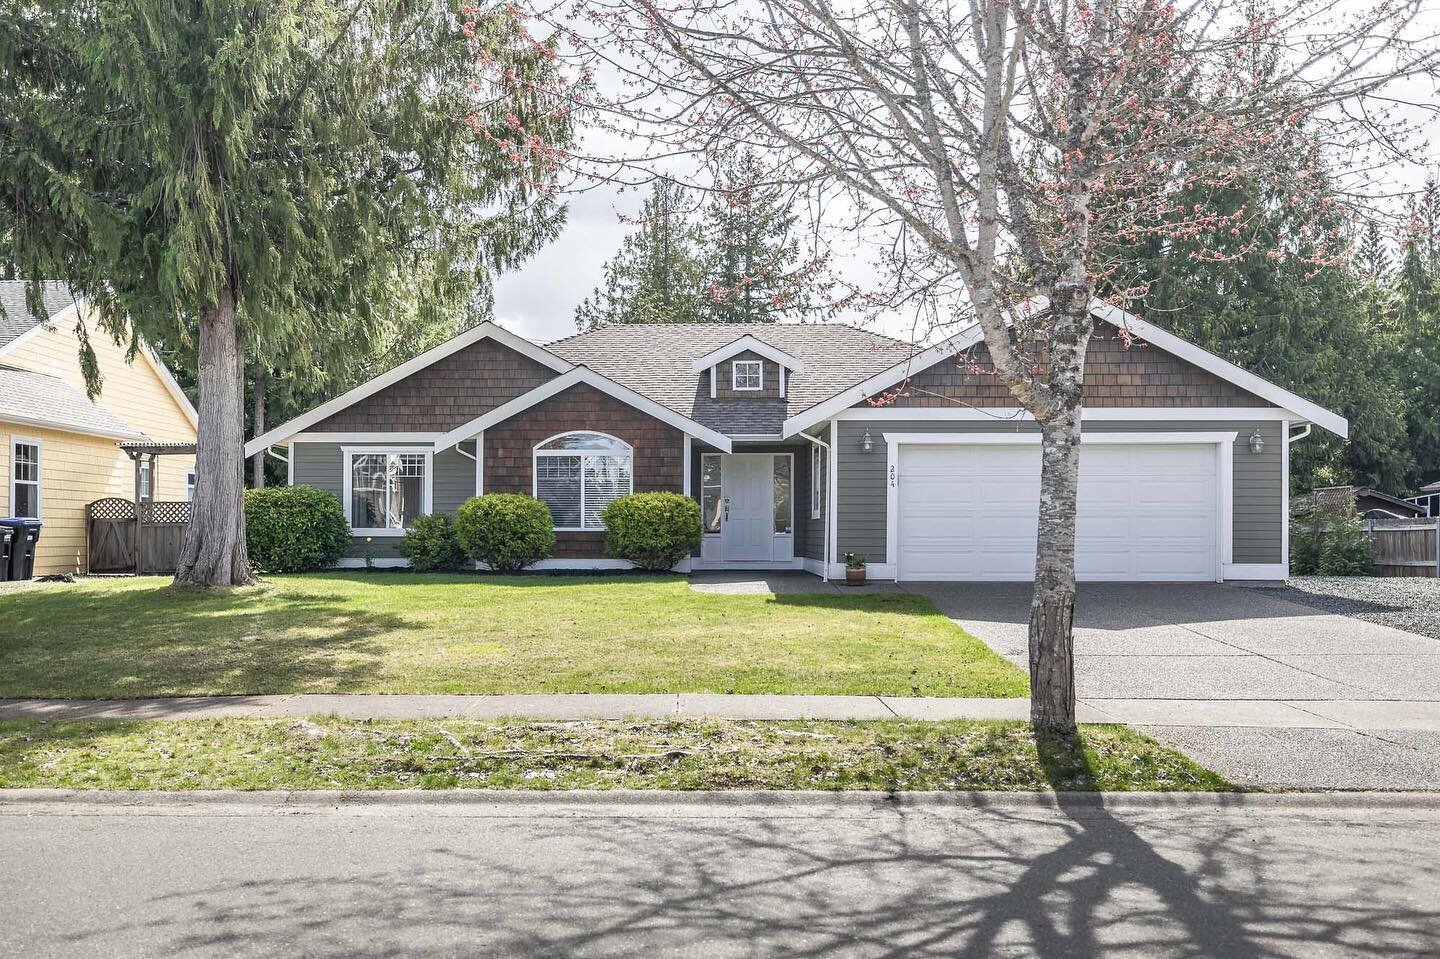 Qualicum Beach Open House Sun April 7 from 1-3pm at 204 Saturna Drive